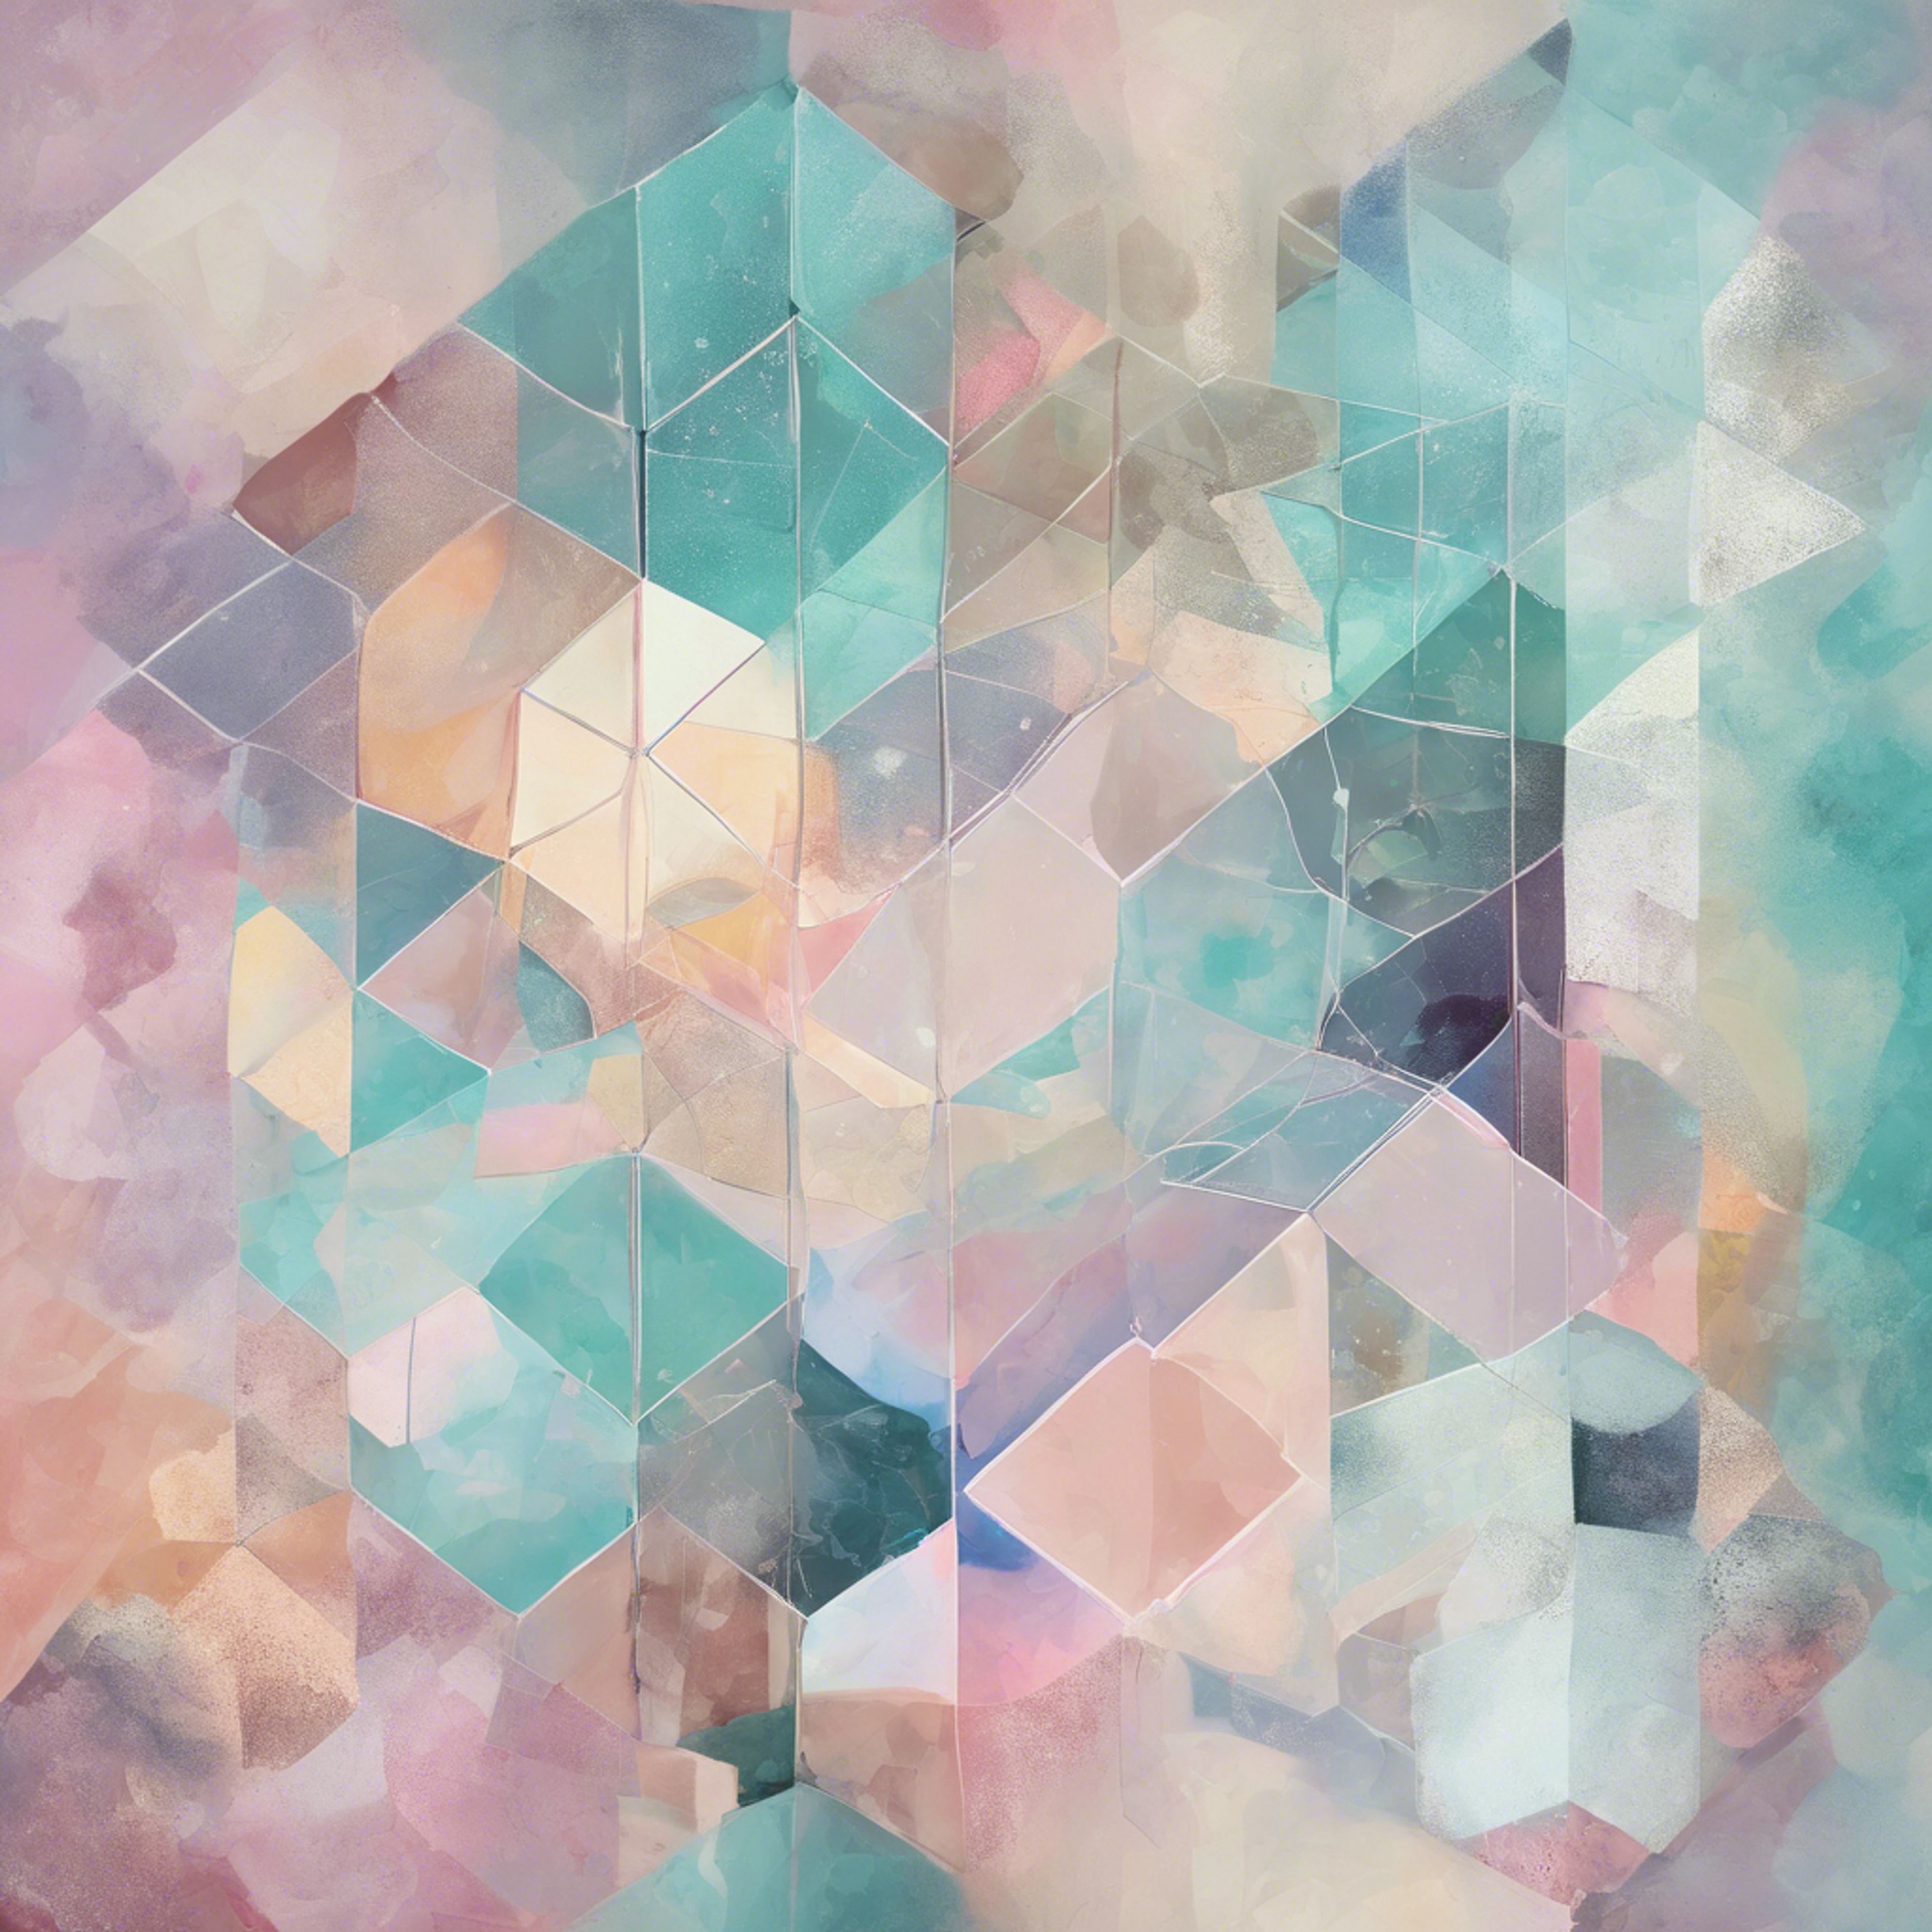 A cool pastel colored abstract painting emphasizing geometric patterns. Behang[4610bdb5de564f779c91]